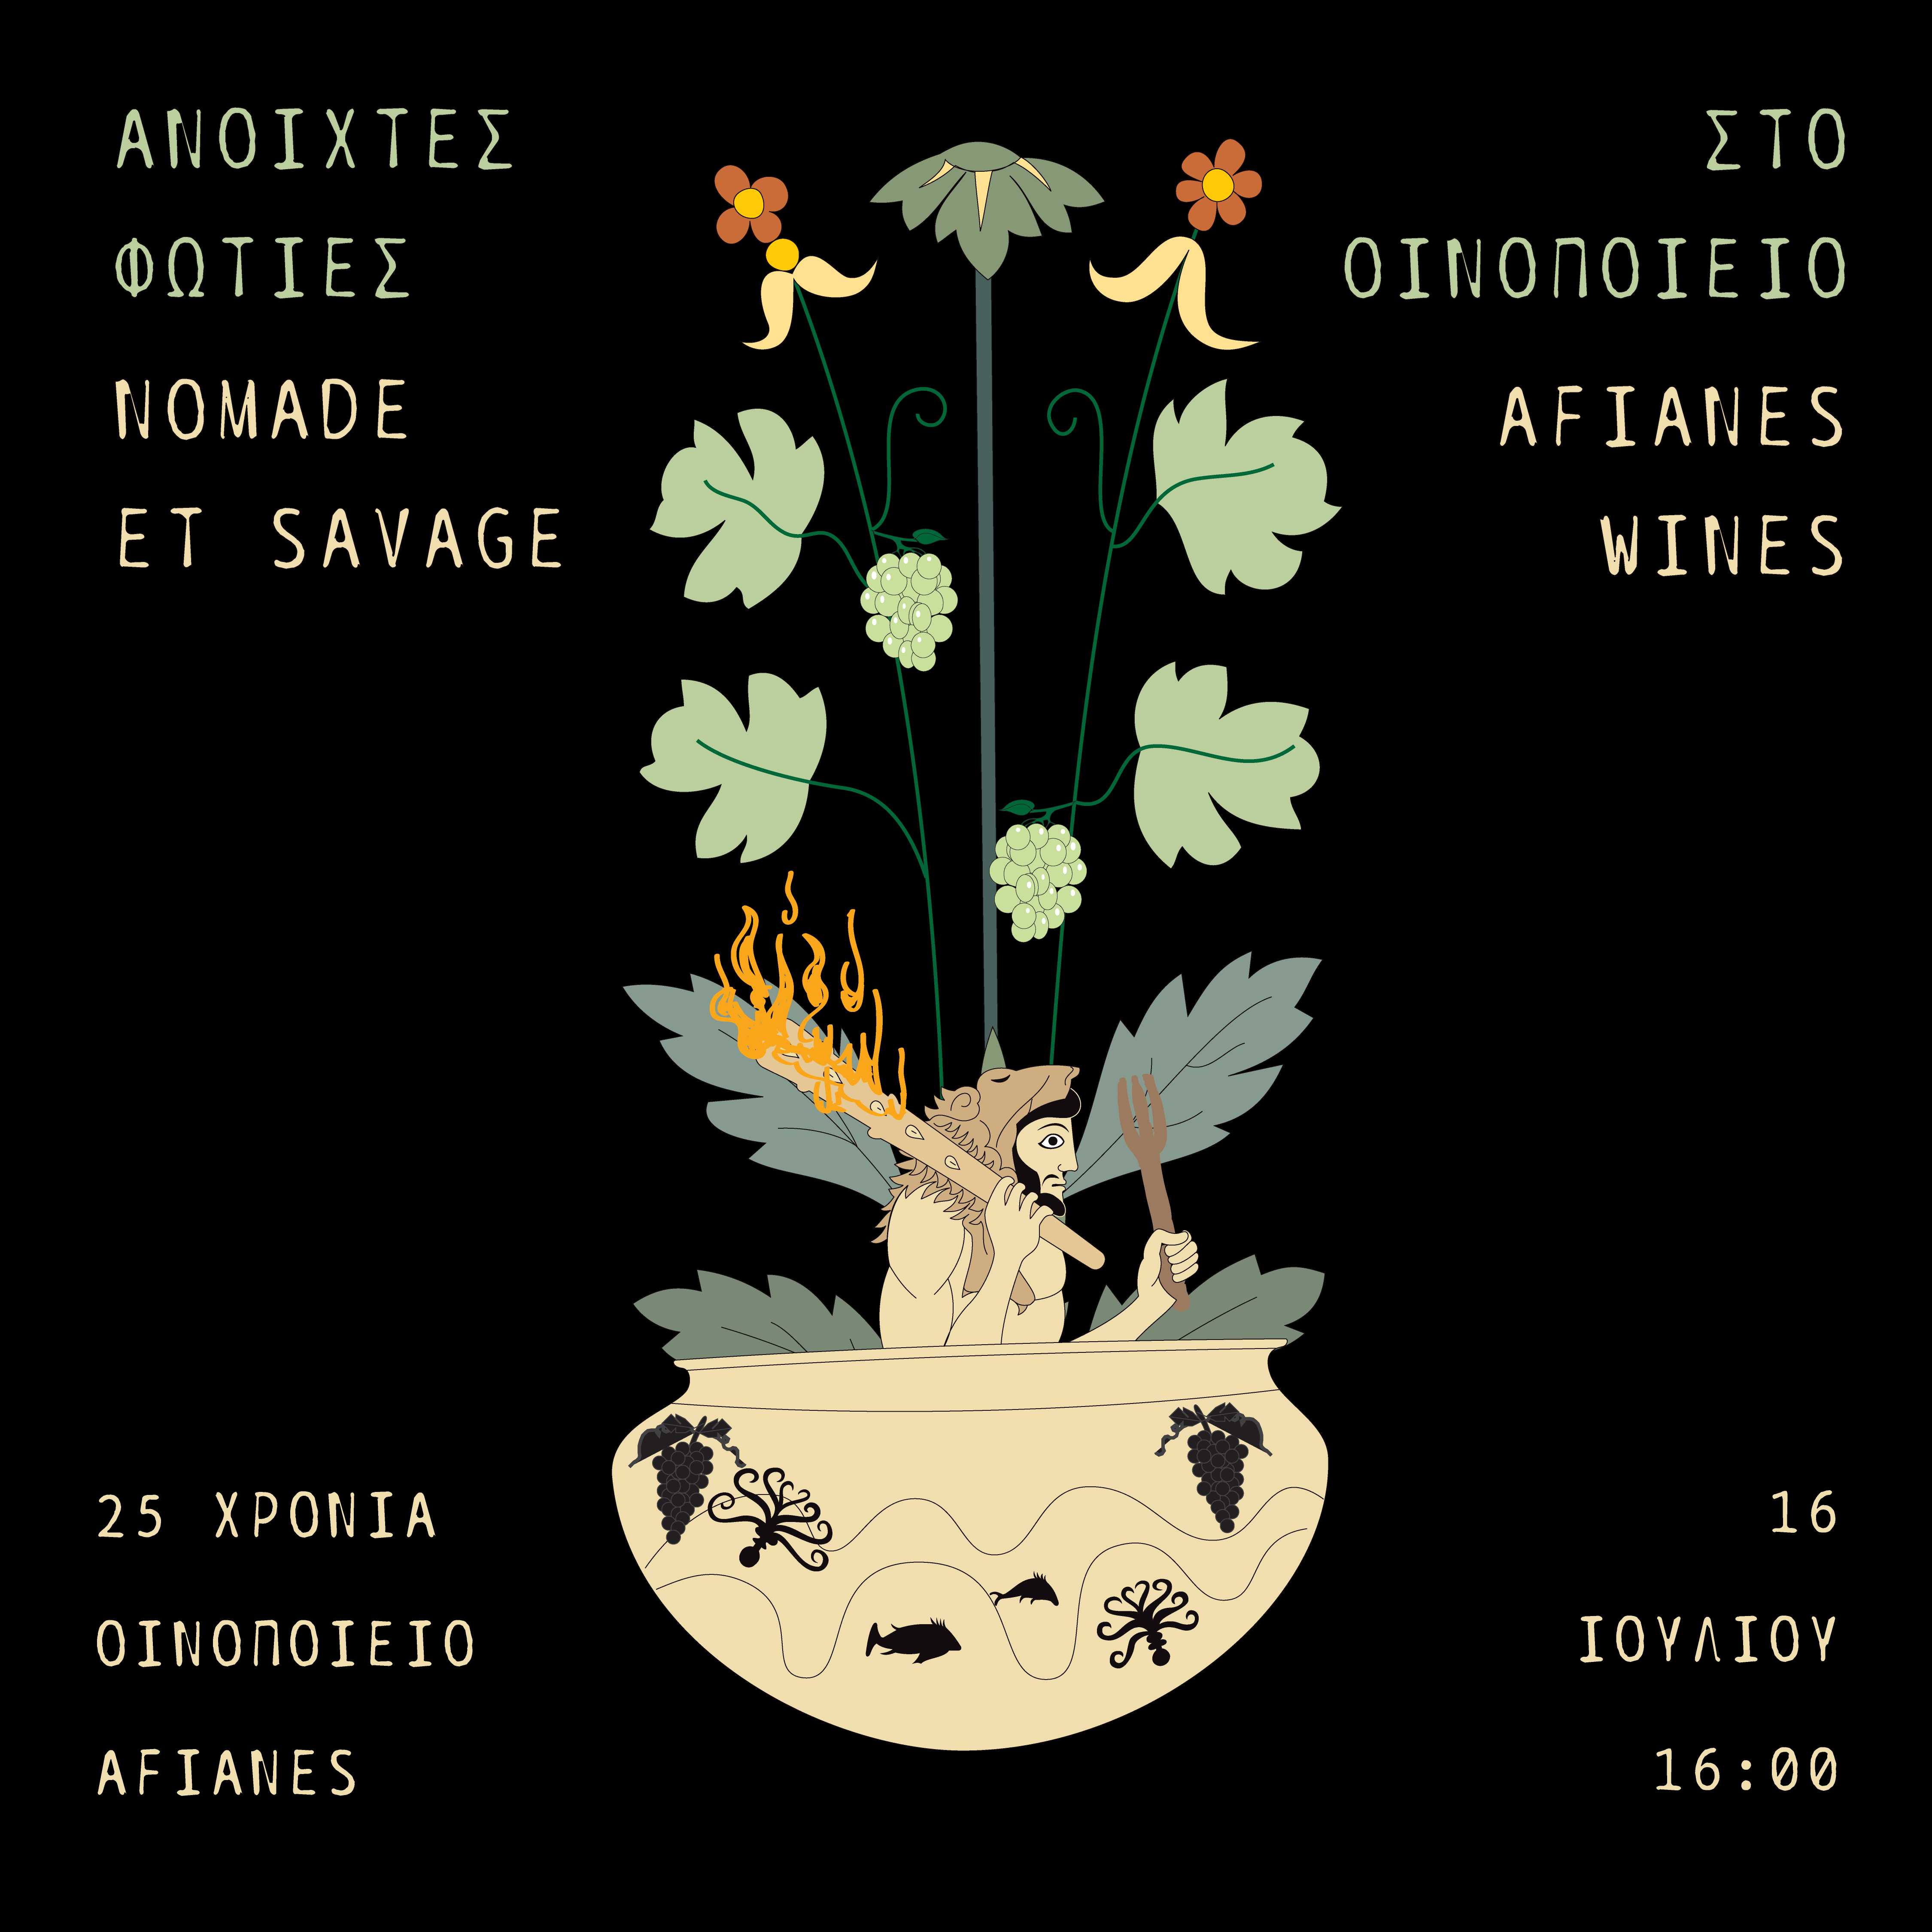 25 years anniversary of Afianes Wines with Nomade et Sauvage 16.07.22